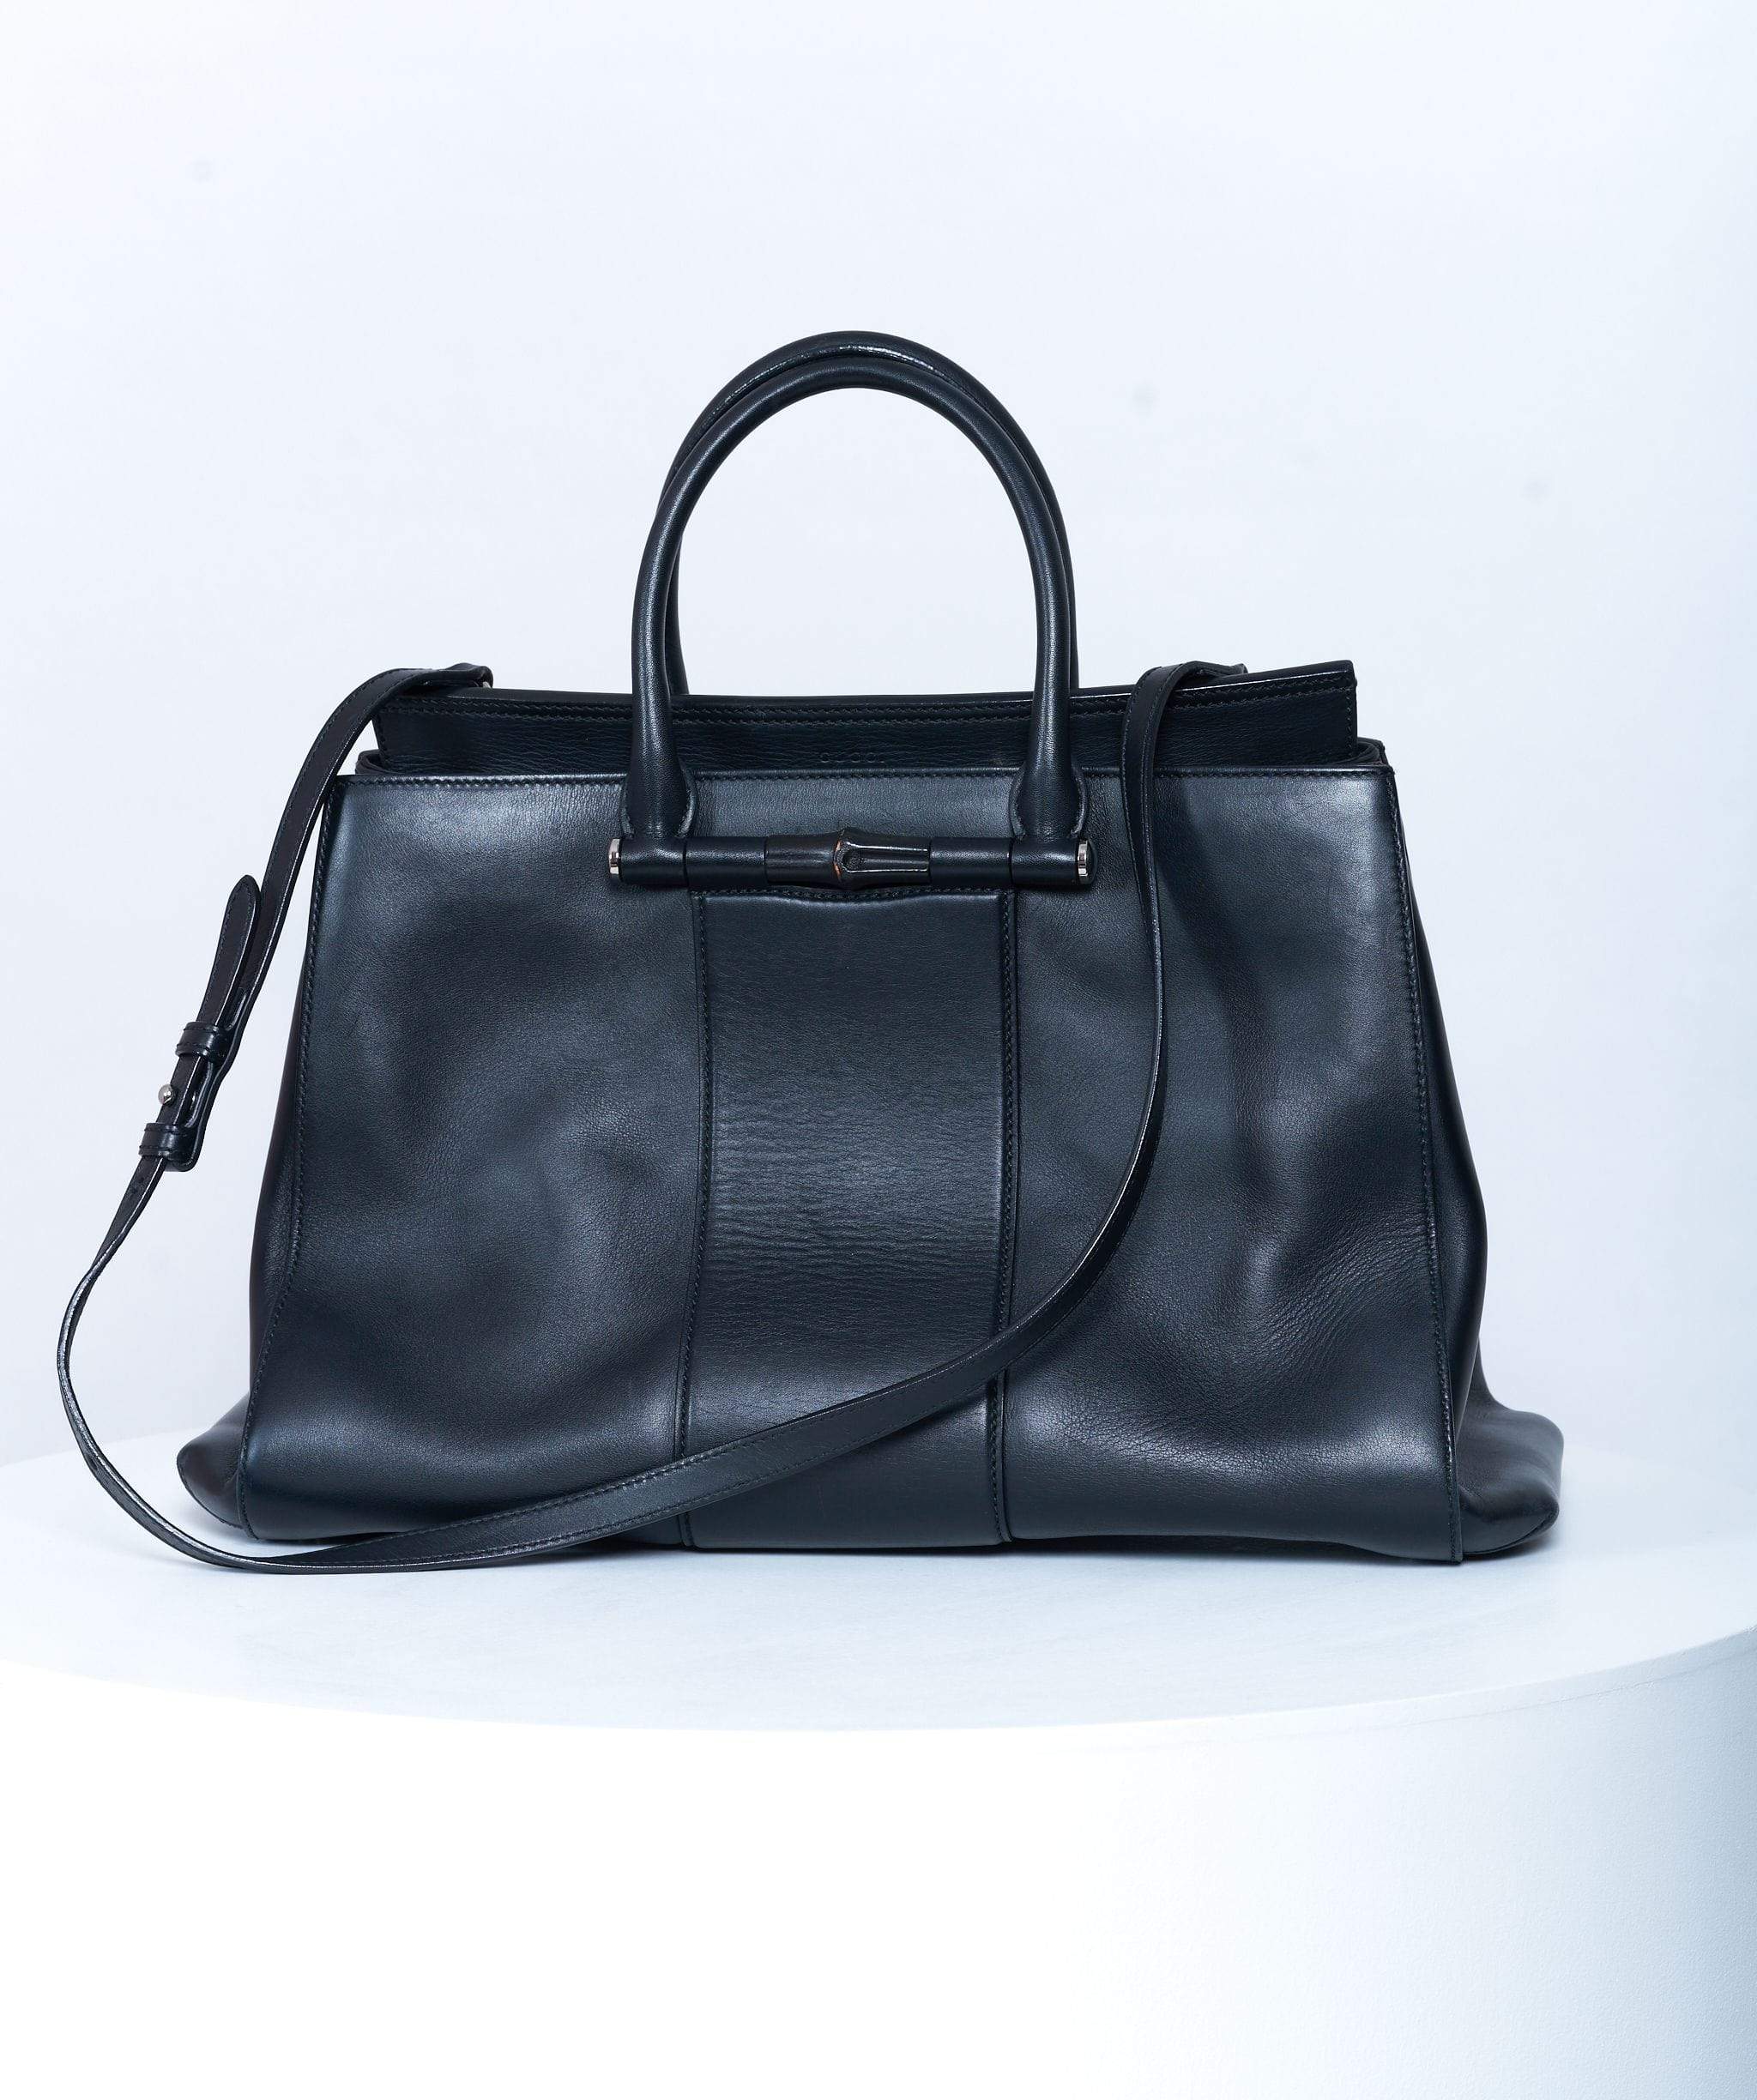 Gucci Gucci Black Leather Bamboo Top Handle Bag